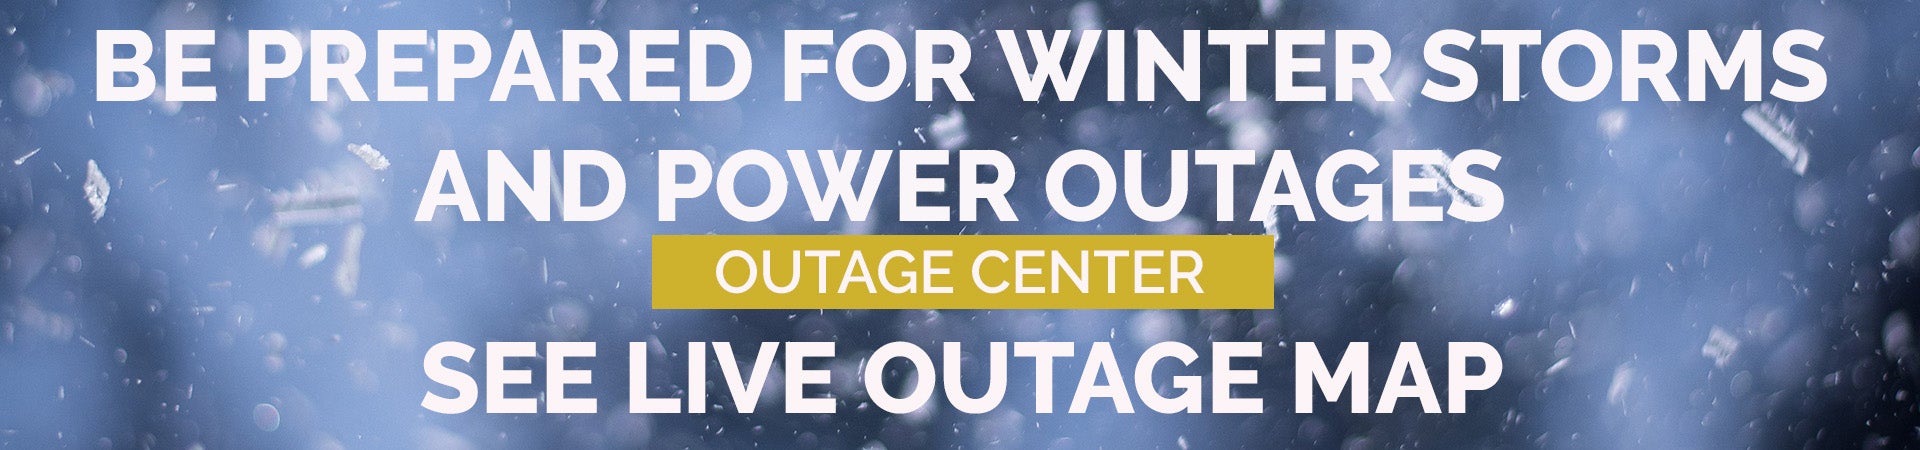 Be prepared for power outages